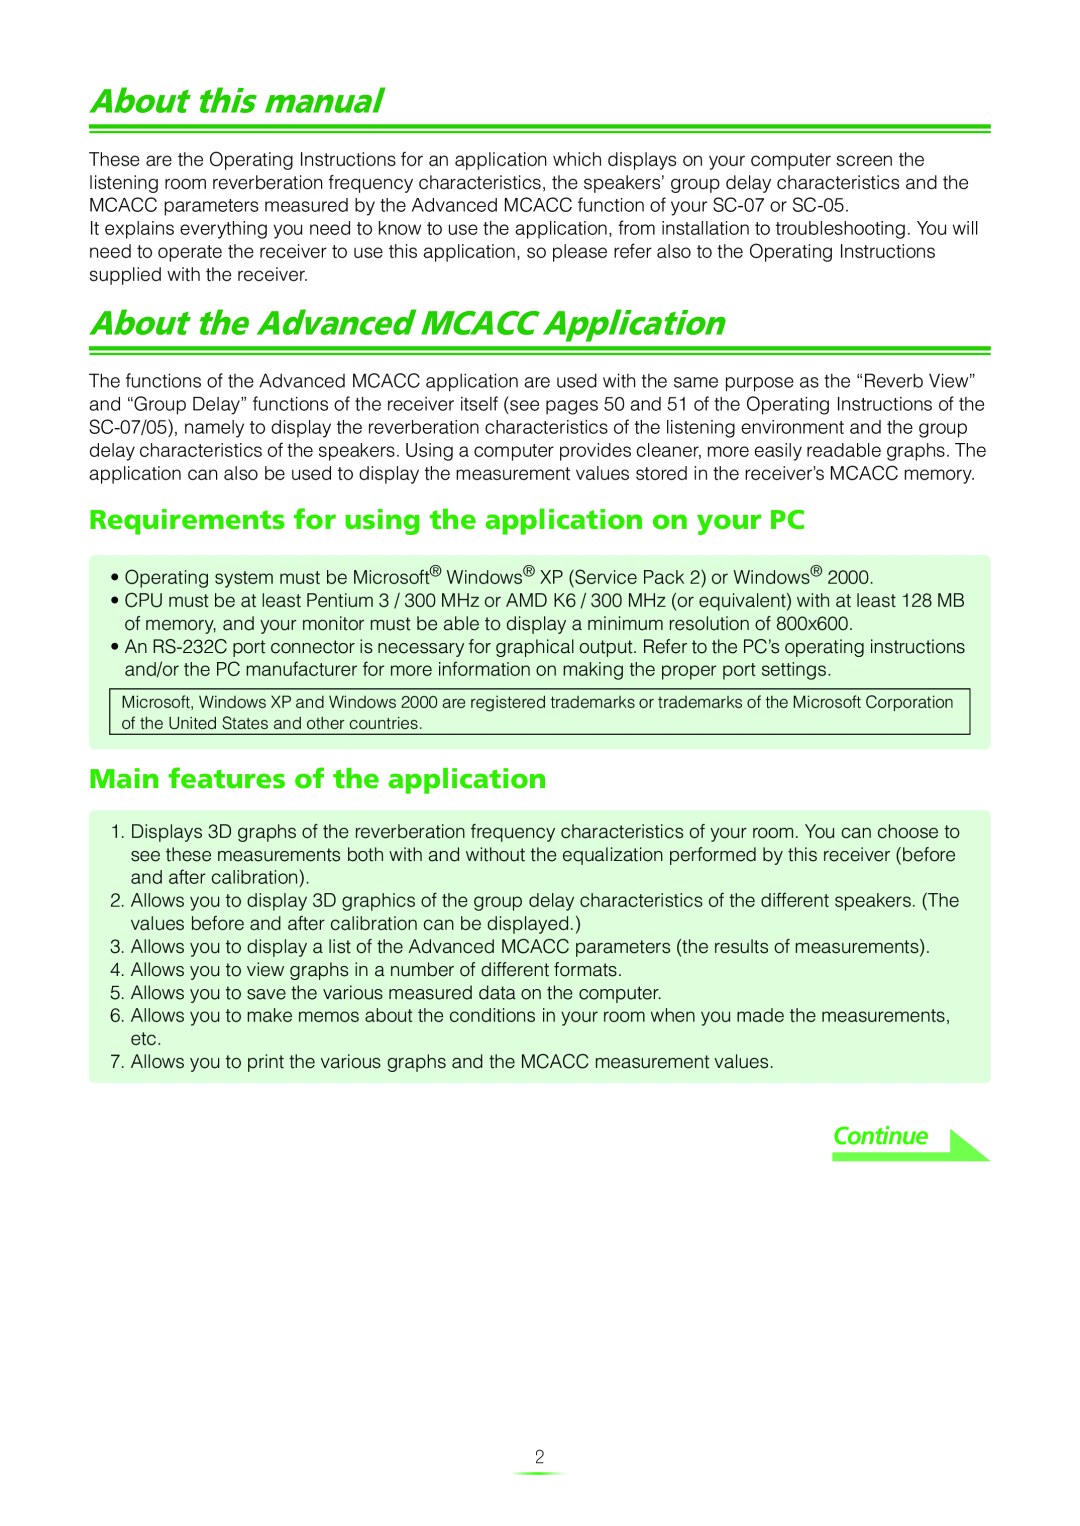 Pioneer SC-07 About this manual, About the Advanced MCACC Application, Requirements for using the application on your PC 